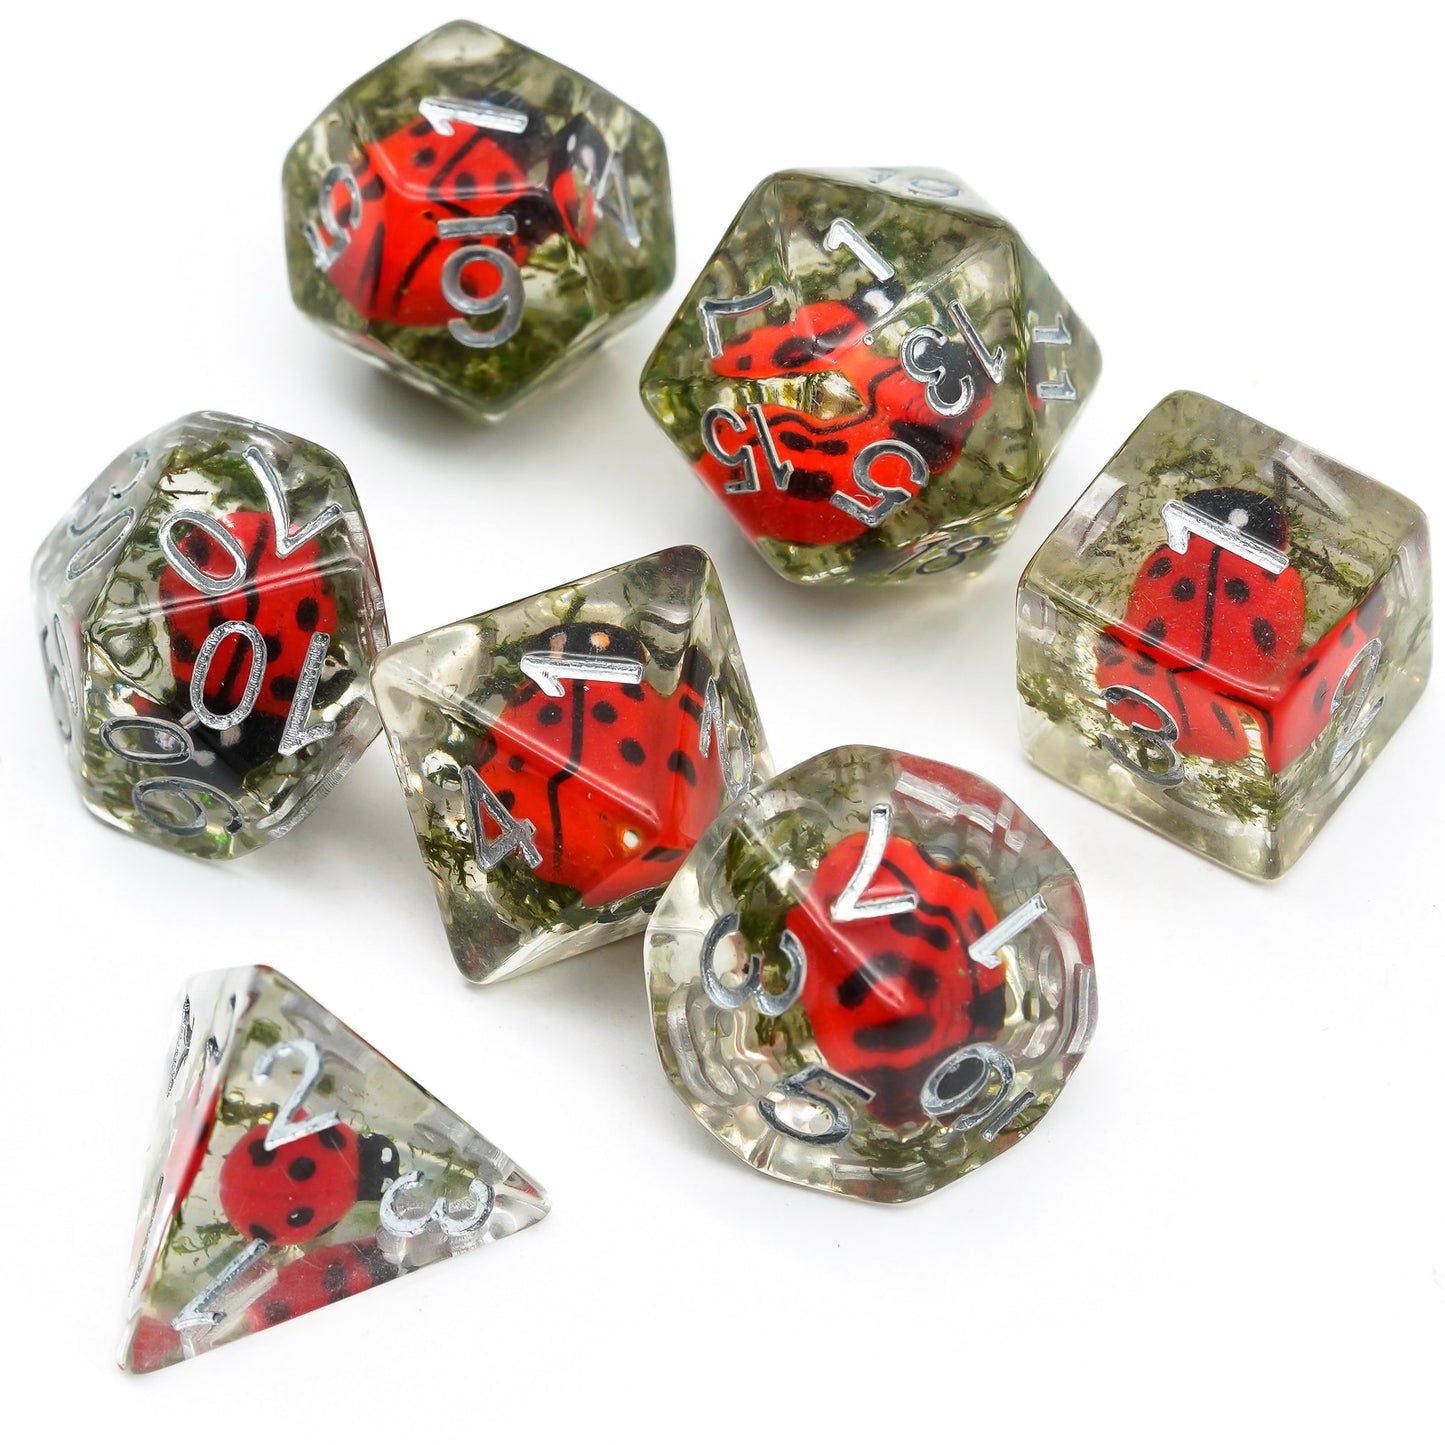 Transparent Ladybug dice set, clear resin with moss and ladybugs inside, white numbers